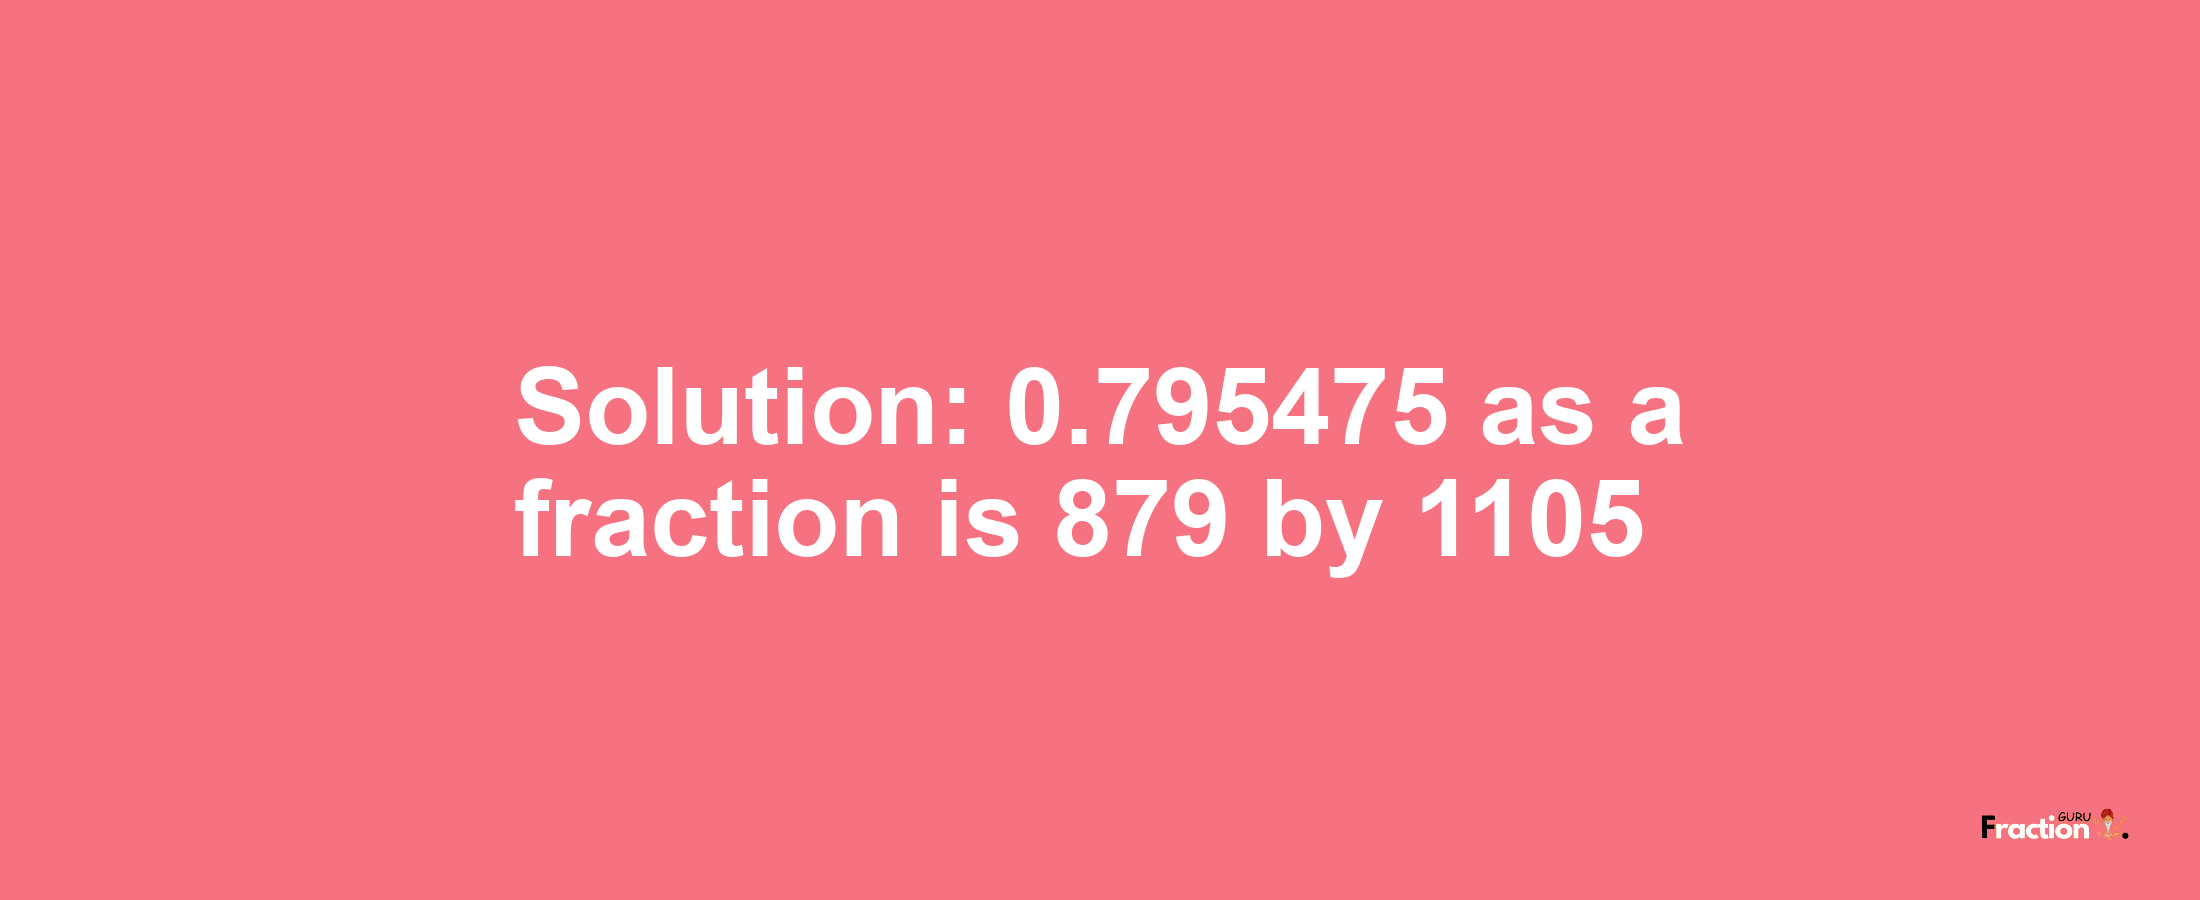 Solution:0.795475 as a fraction is 879/1105